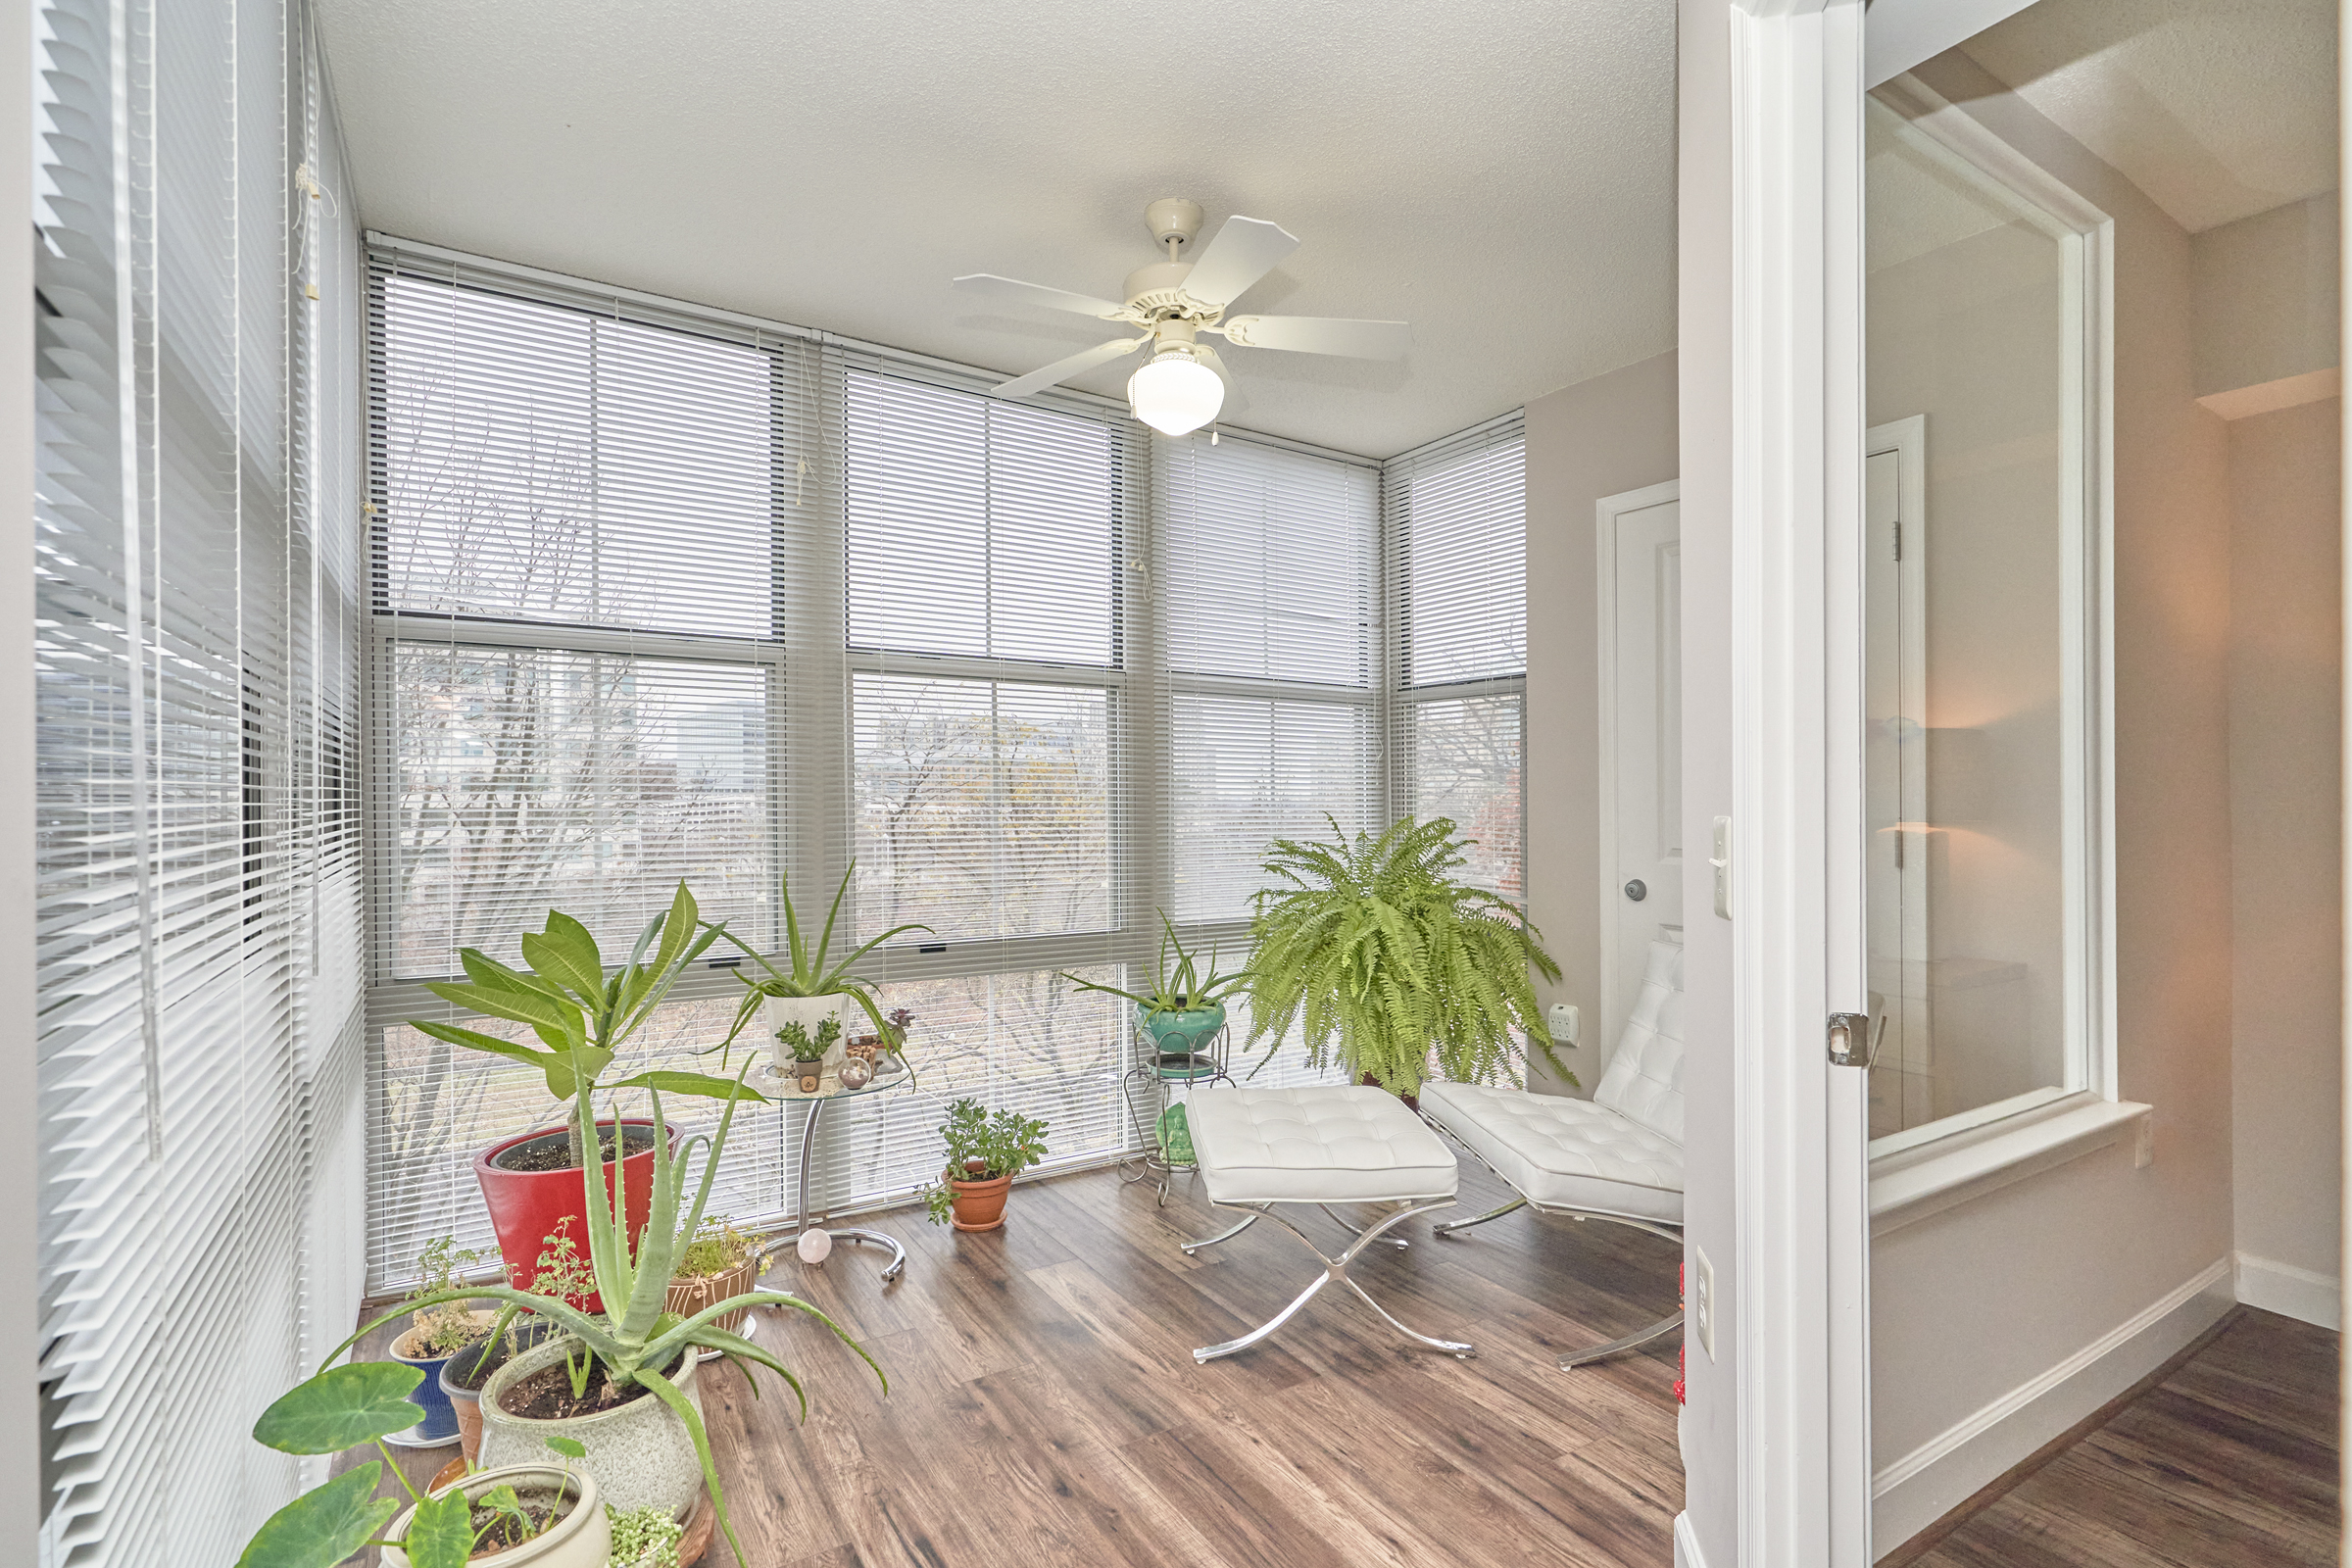 Interior professional photo of 11800 Sunset Hills Road Unit #811, showing the sunroom with several potted plants on the floor around the edge